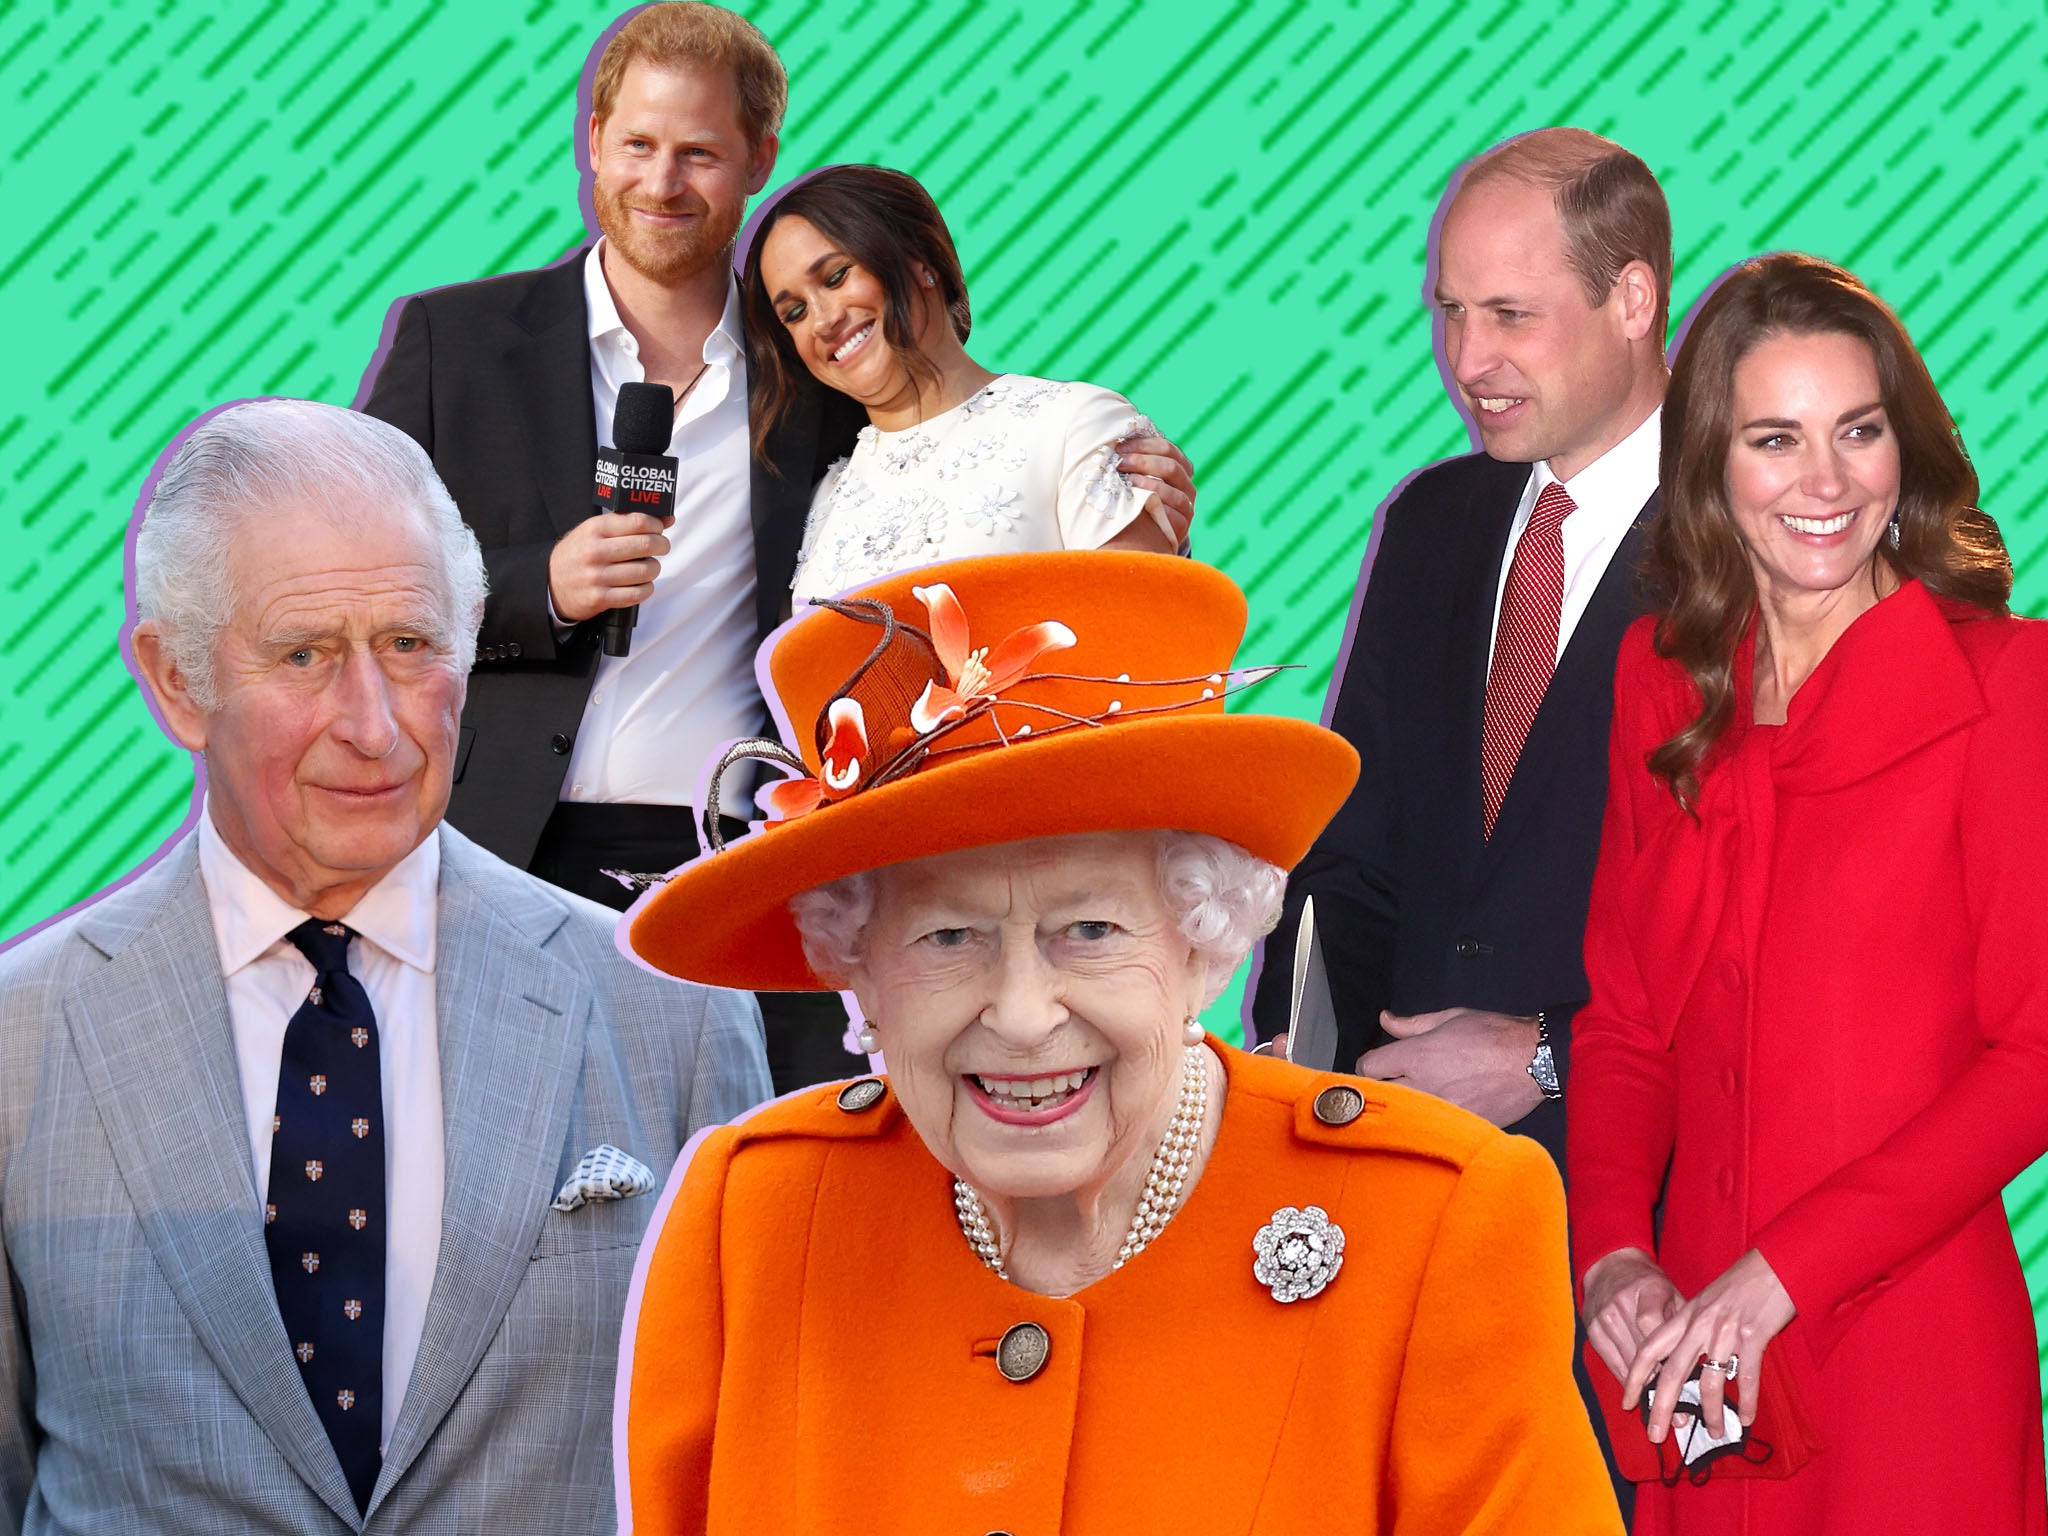 Sustainability has given the royals a chance to fill the hole Meghan and Harry left